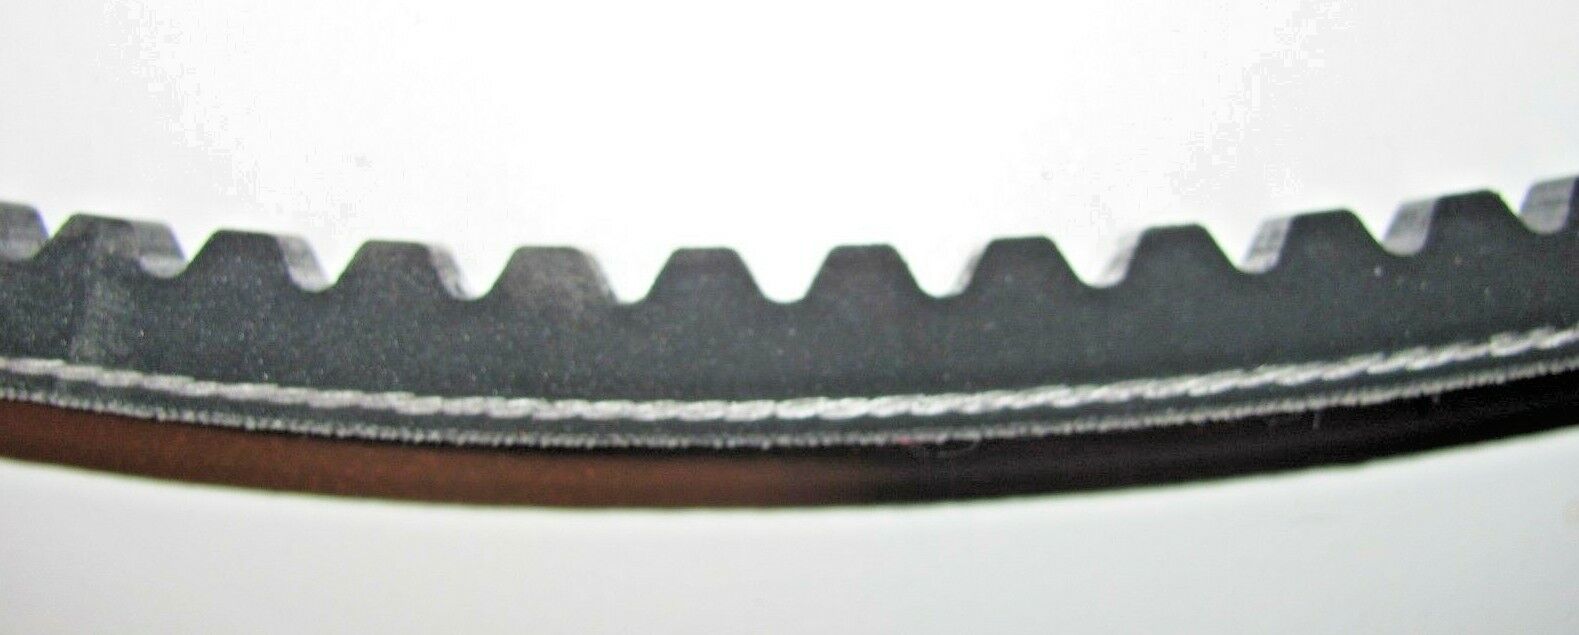 2 REPLACEMENT BELTS BEFCO C50-RD7 MODEL 7' FINISHING MOWER-BEFCO 000-6694 6694 - 0